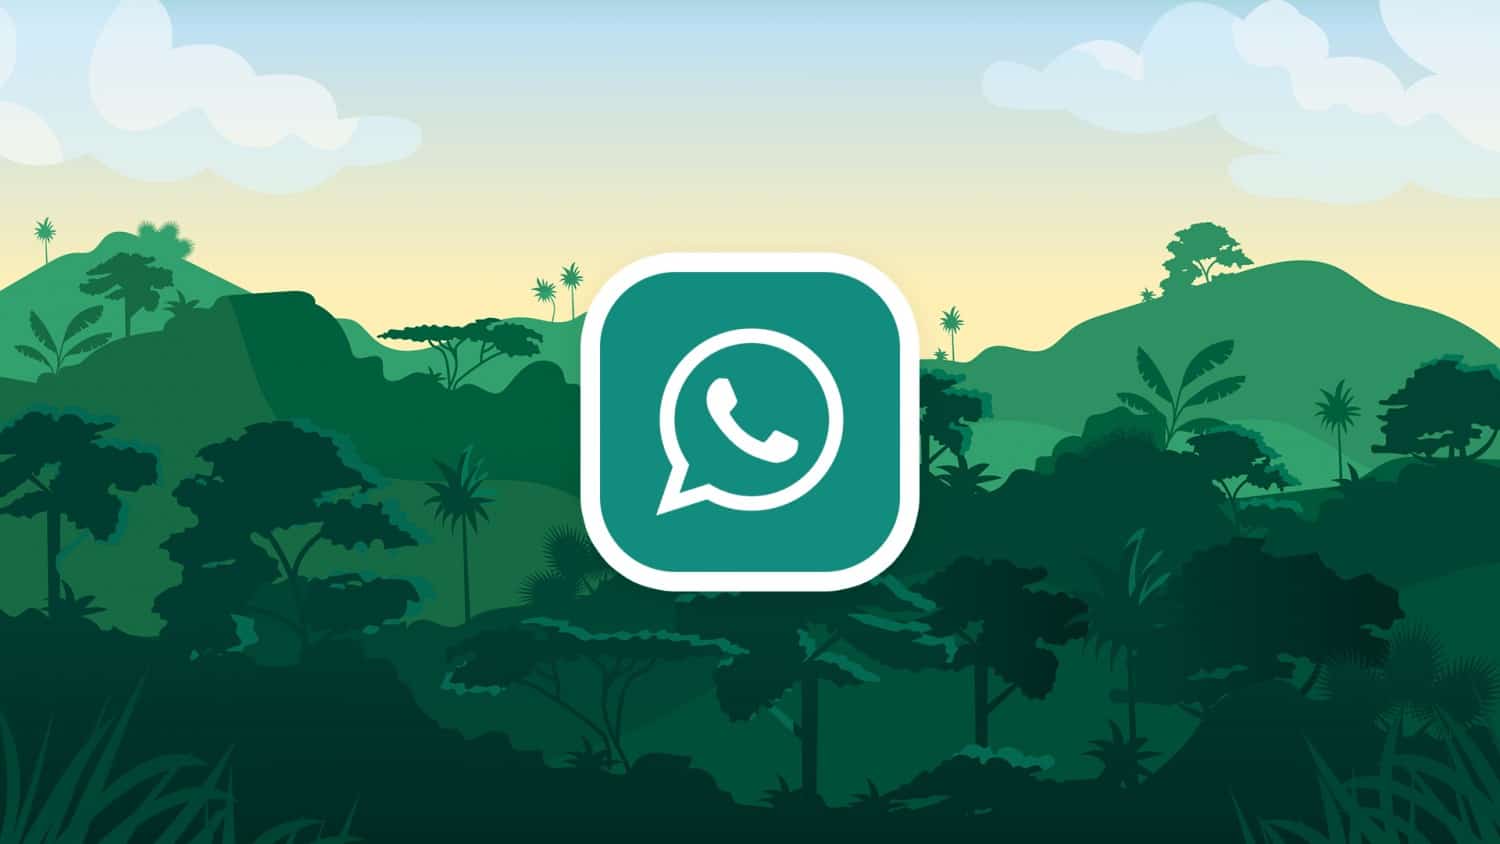 Download GBWhatsApp Pro v17.51 Latest Version | AndroidWaves